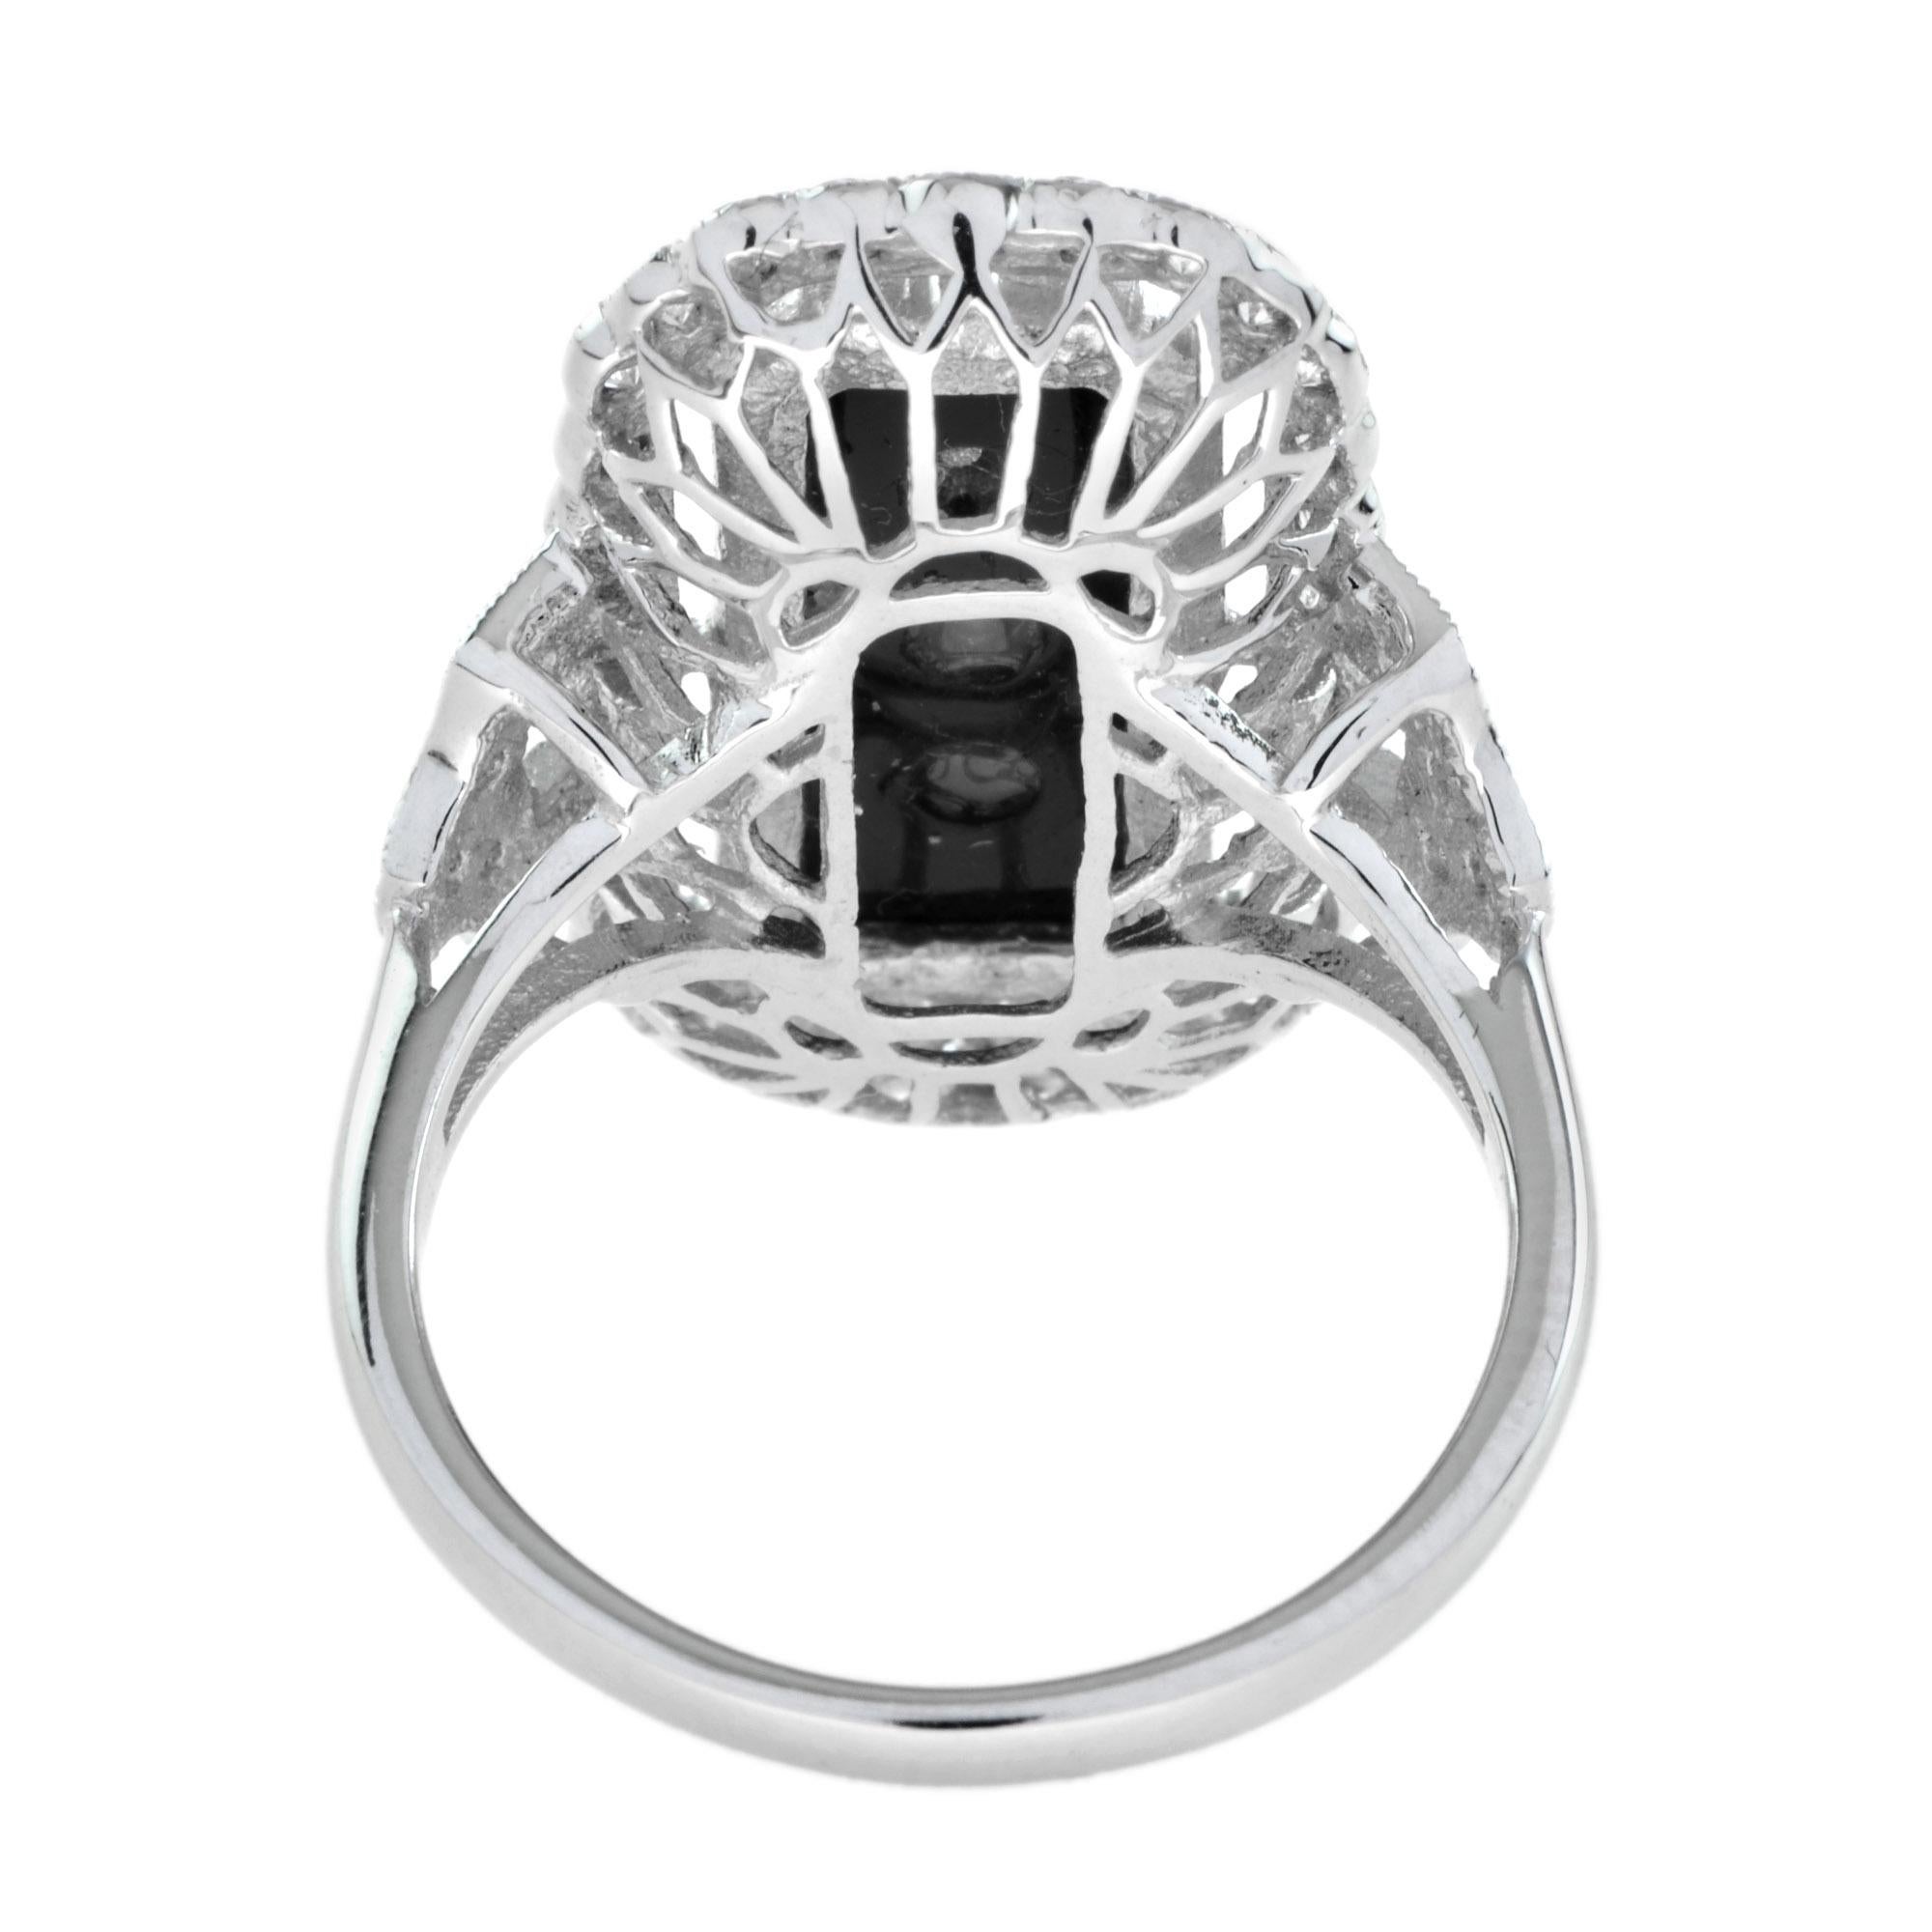 For Sale:  Art Deco Style Diamond and Onyx Ring in 18K White Gold 4